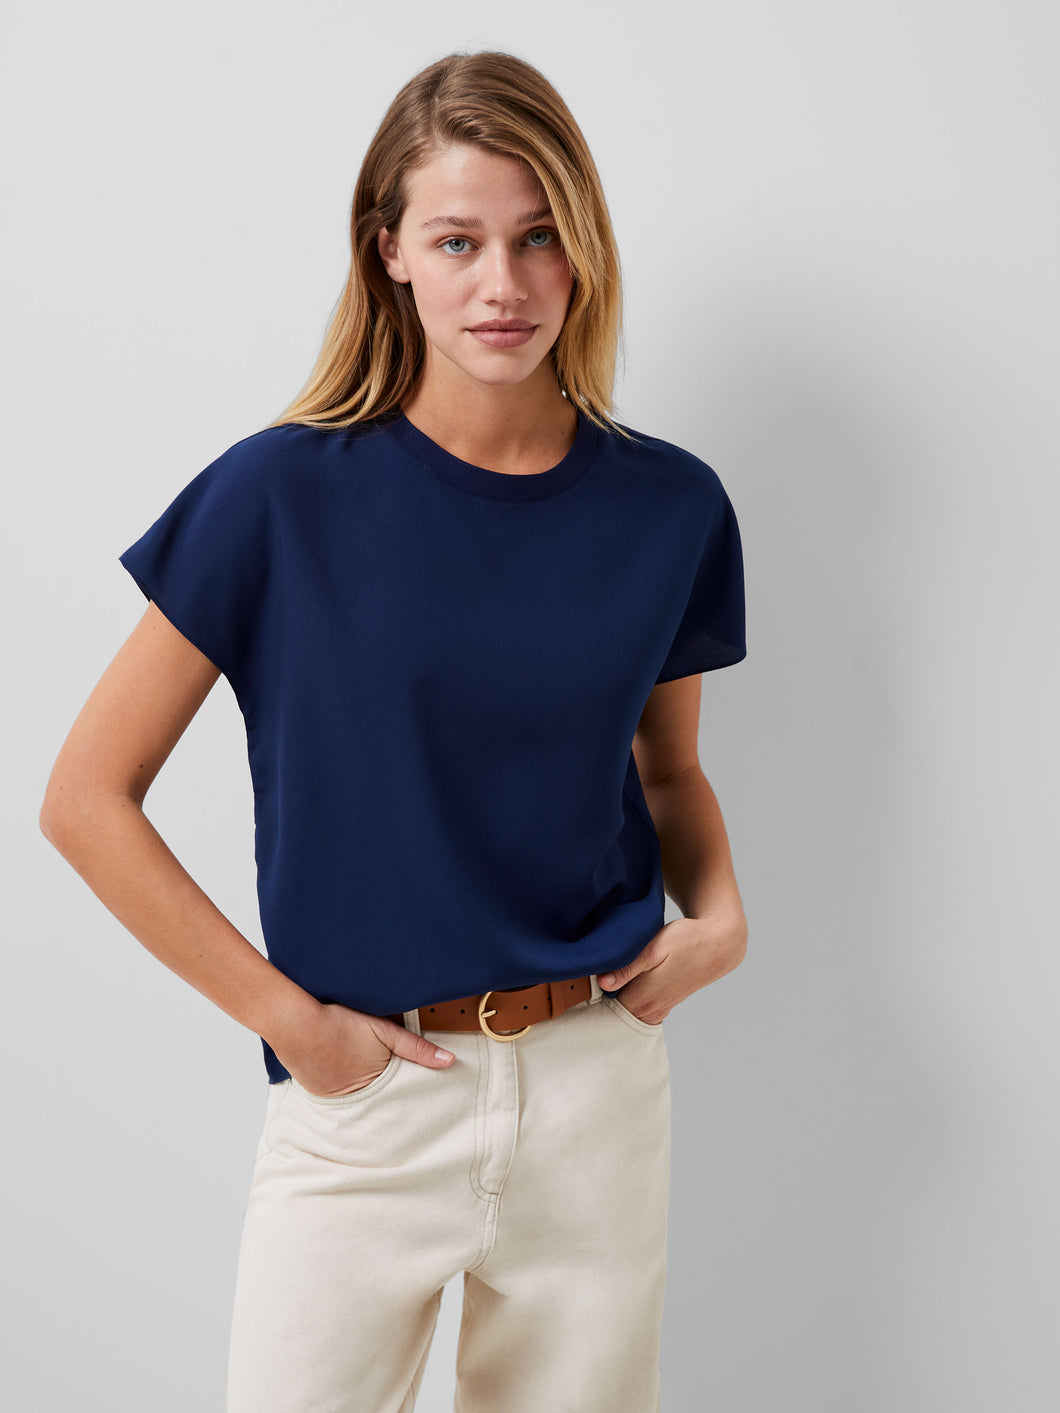 French Connection - Crepe Light Crew Neck Top in Navy